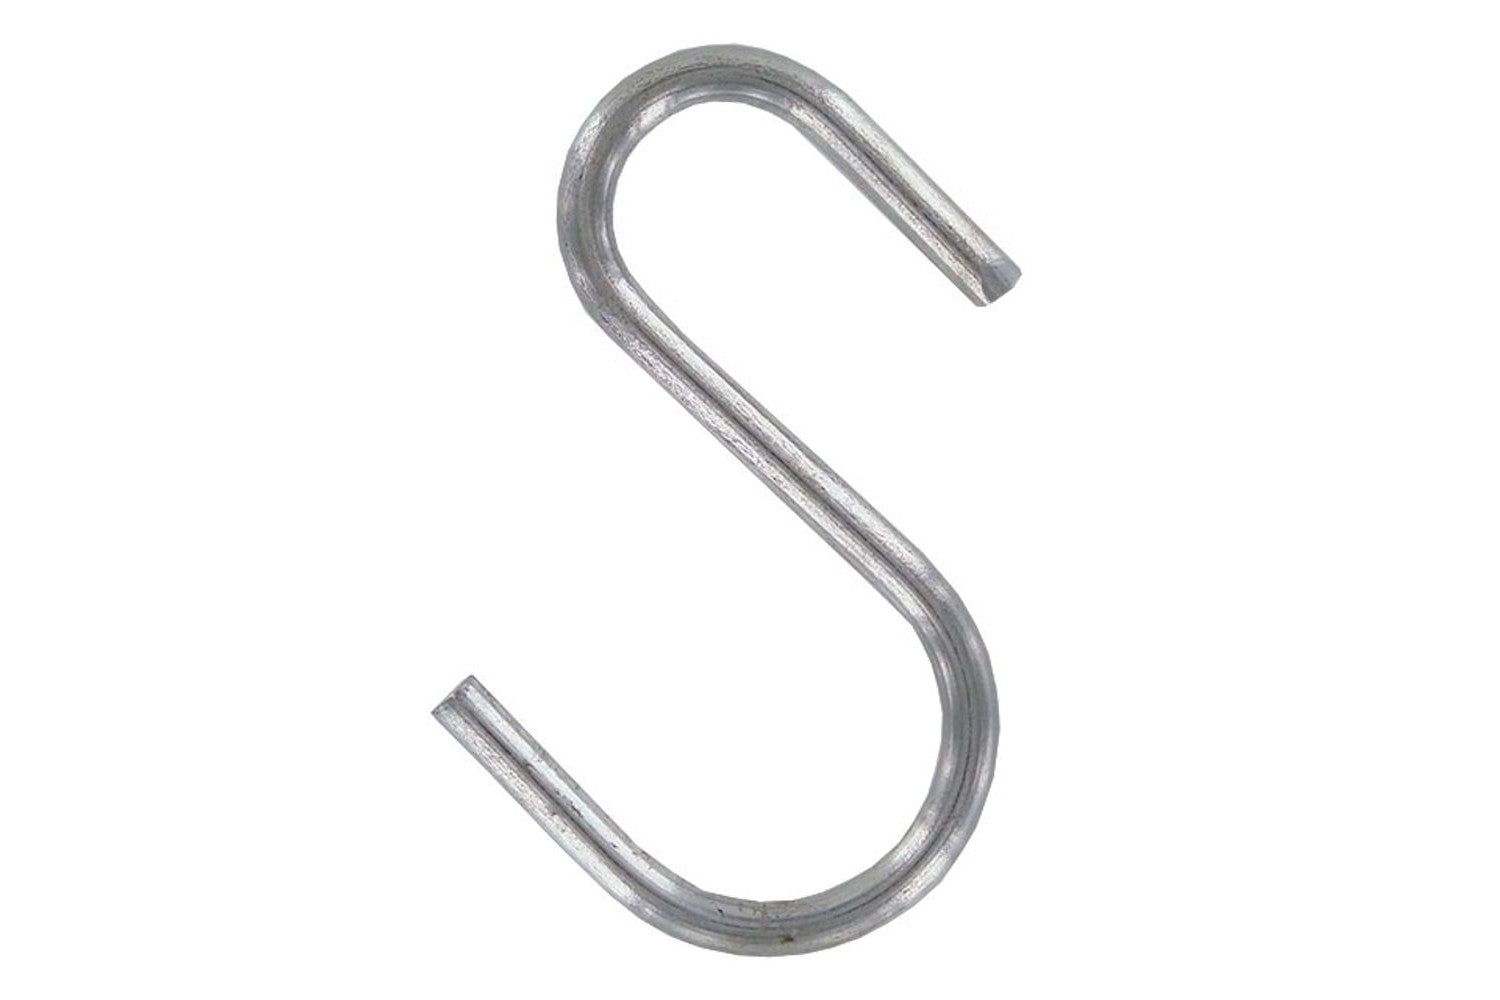 Ugotfeels Crane Scale S Hook Heavy Duty 304 Stainless Steel 4.4 Inch Long 0.55 Inch Thickness Super Large S Shaped Hooks For Hanging And Utility Use 